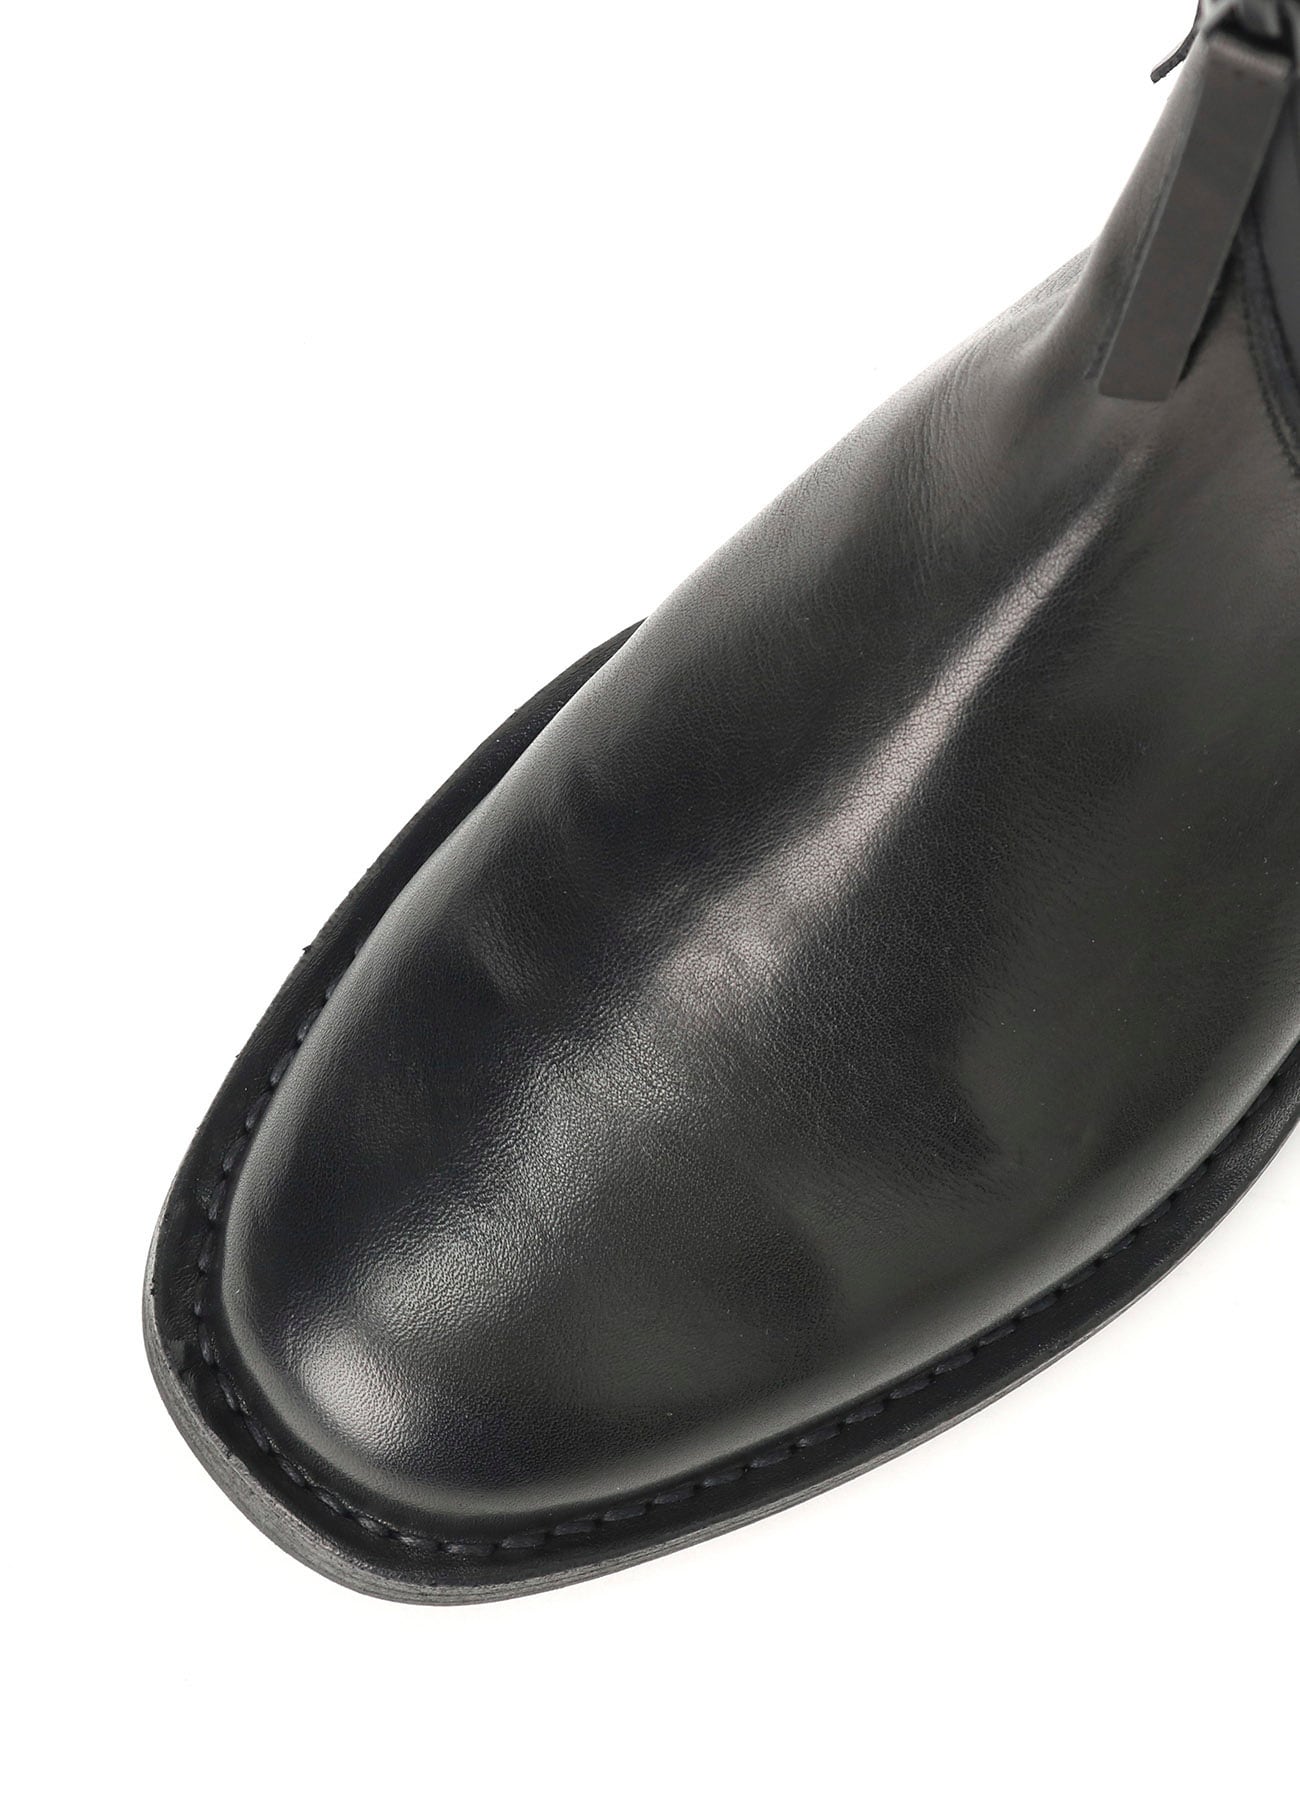 WAXED CALF LEATHER CURVED ZIPPER BOOTS